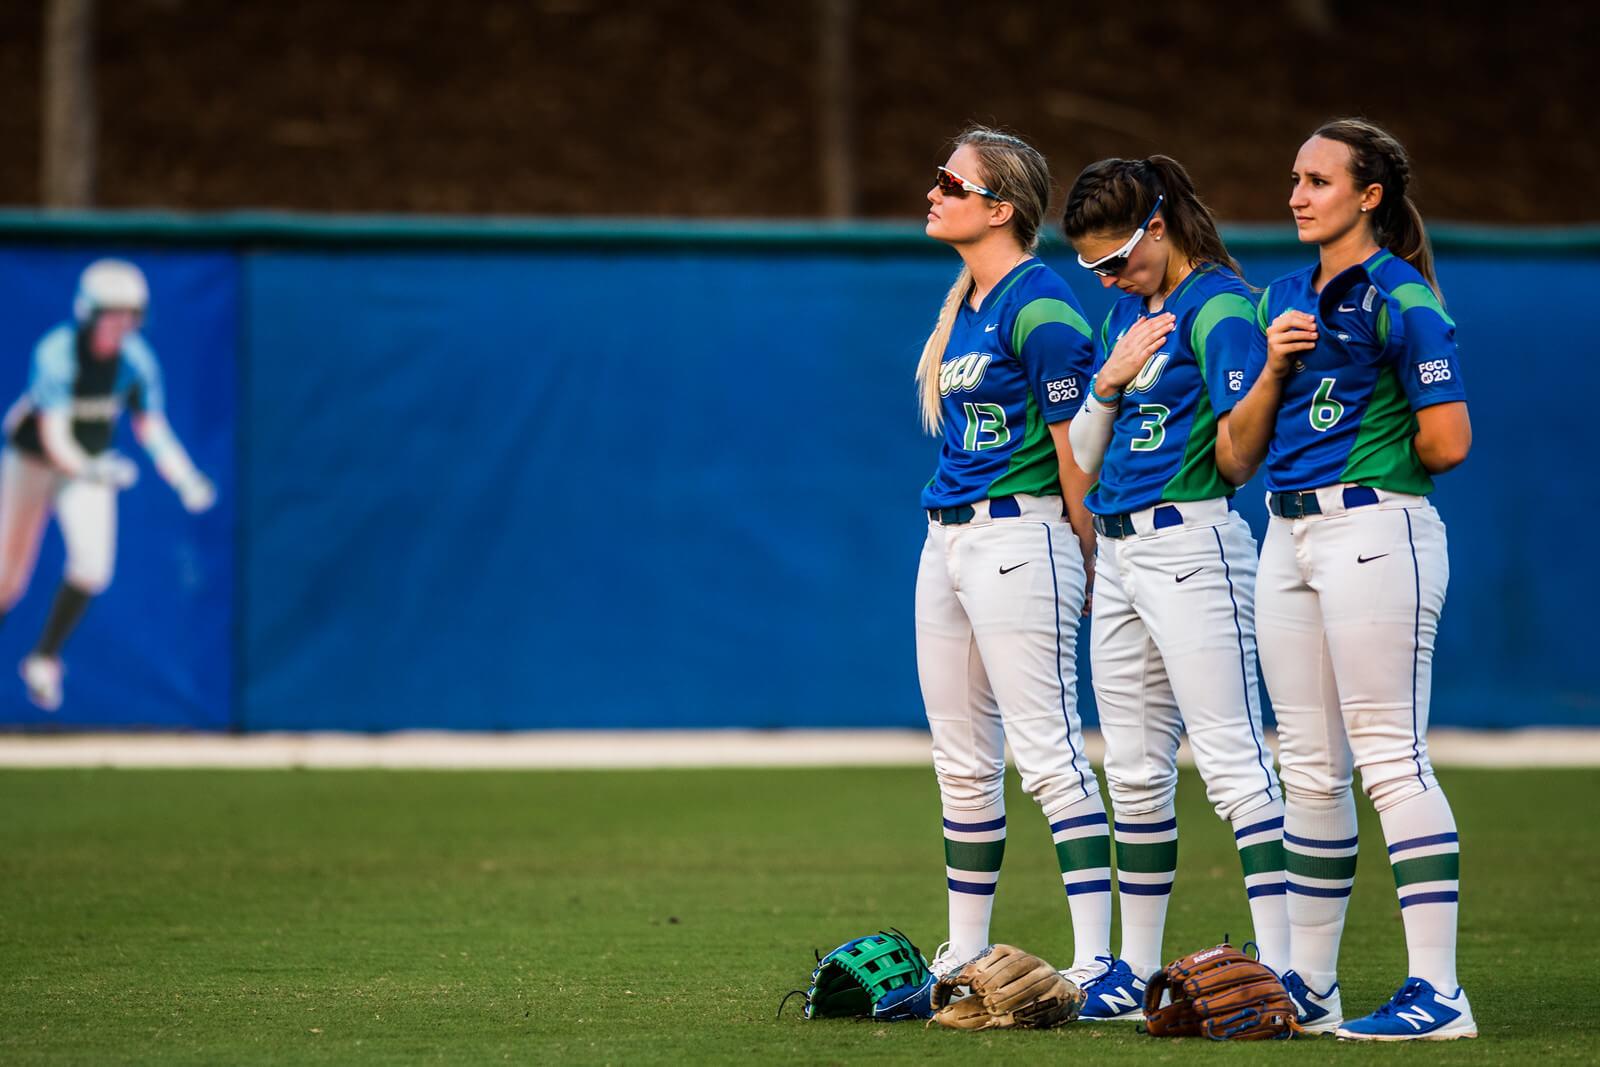 FGCU Softball in USF for a doubleheader